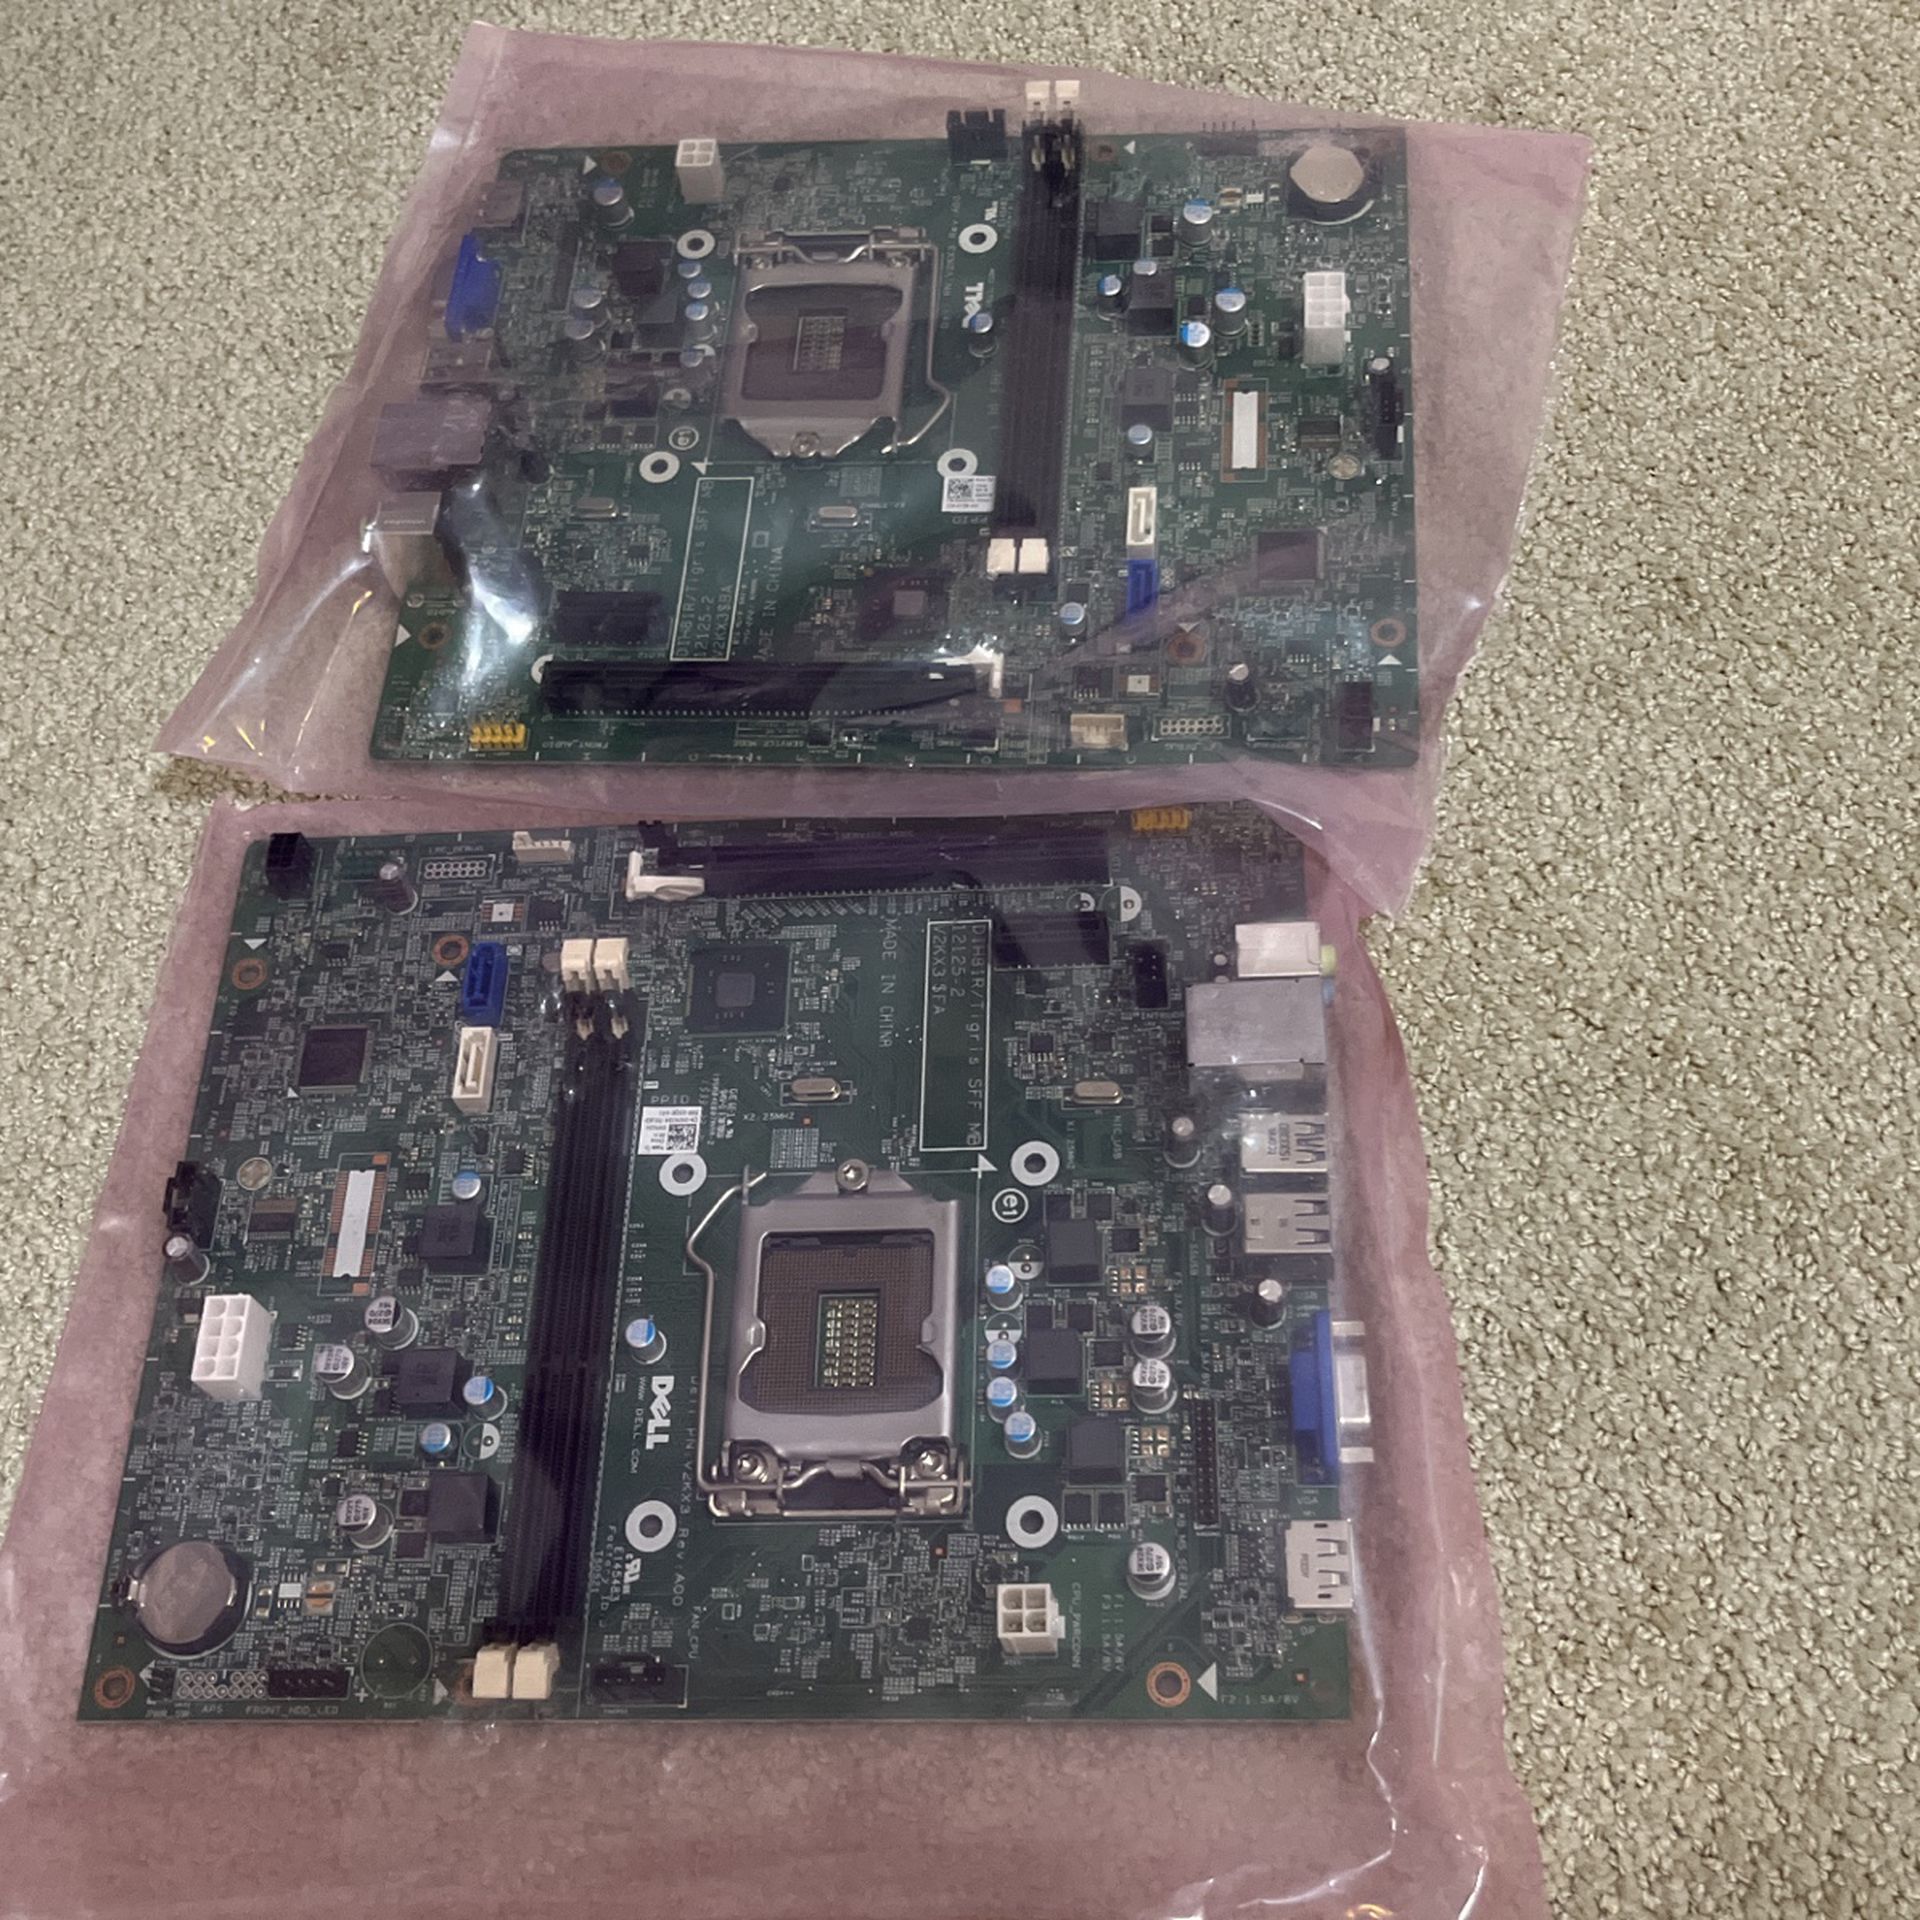 TWO NEW AND TESTED DELL MOTHERBOARDS, NO CPU OR ANYTHING. CLEAN MB COMPUTER PART ACCESSORIES